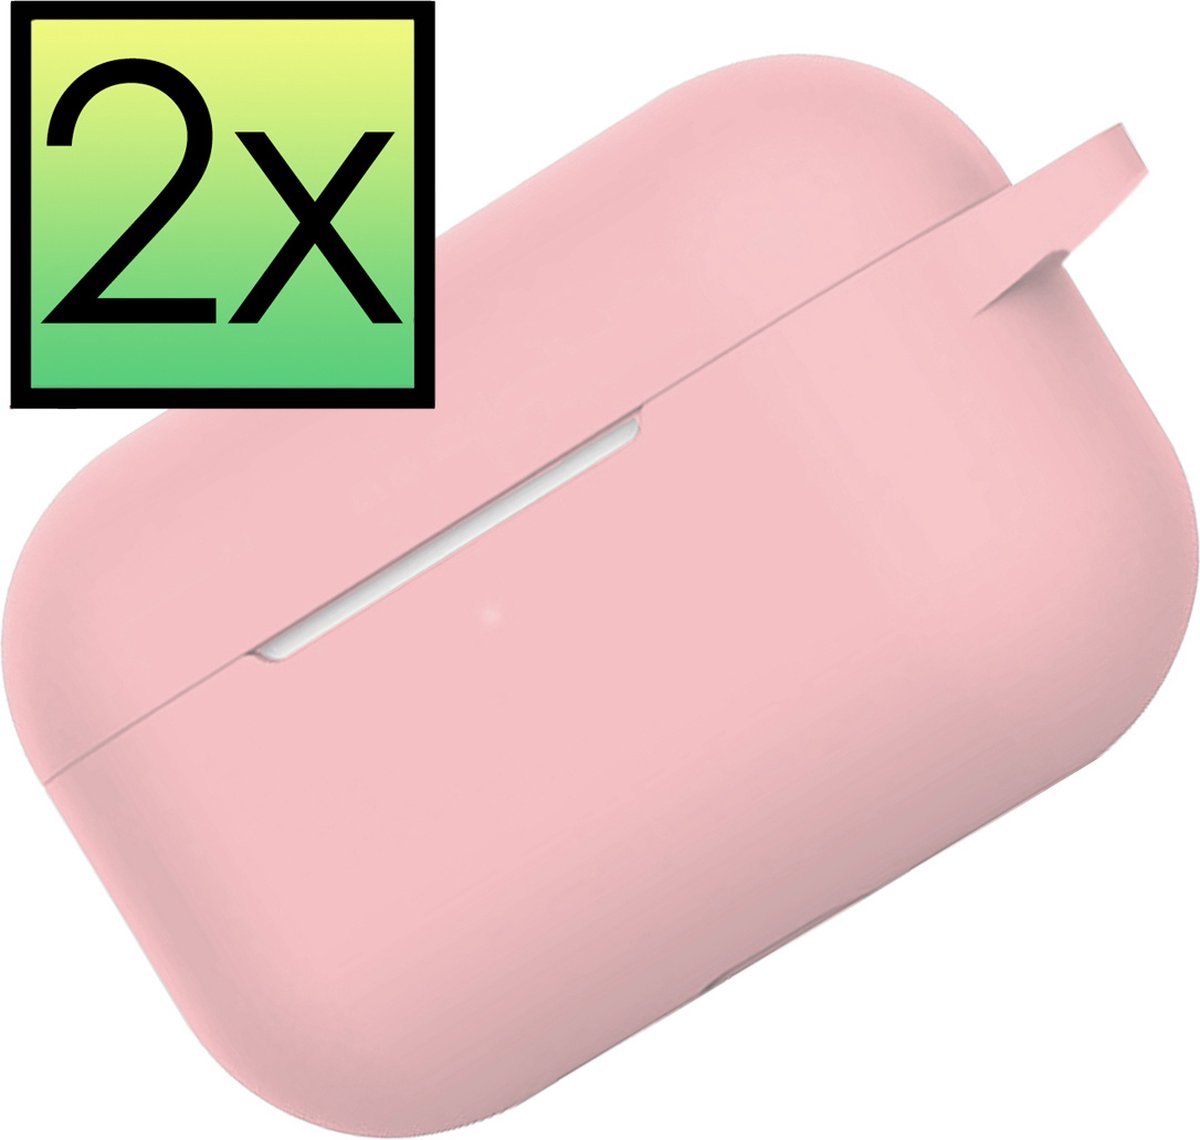 Hoes Geschikt voor AirPods Pro 2 Hoesje Cover Silicone Case Hoes - 2x - Lichtroze